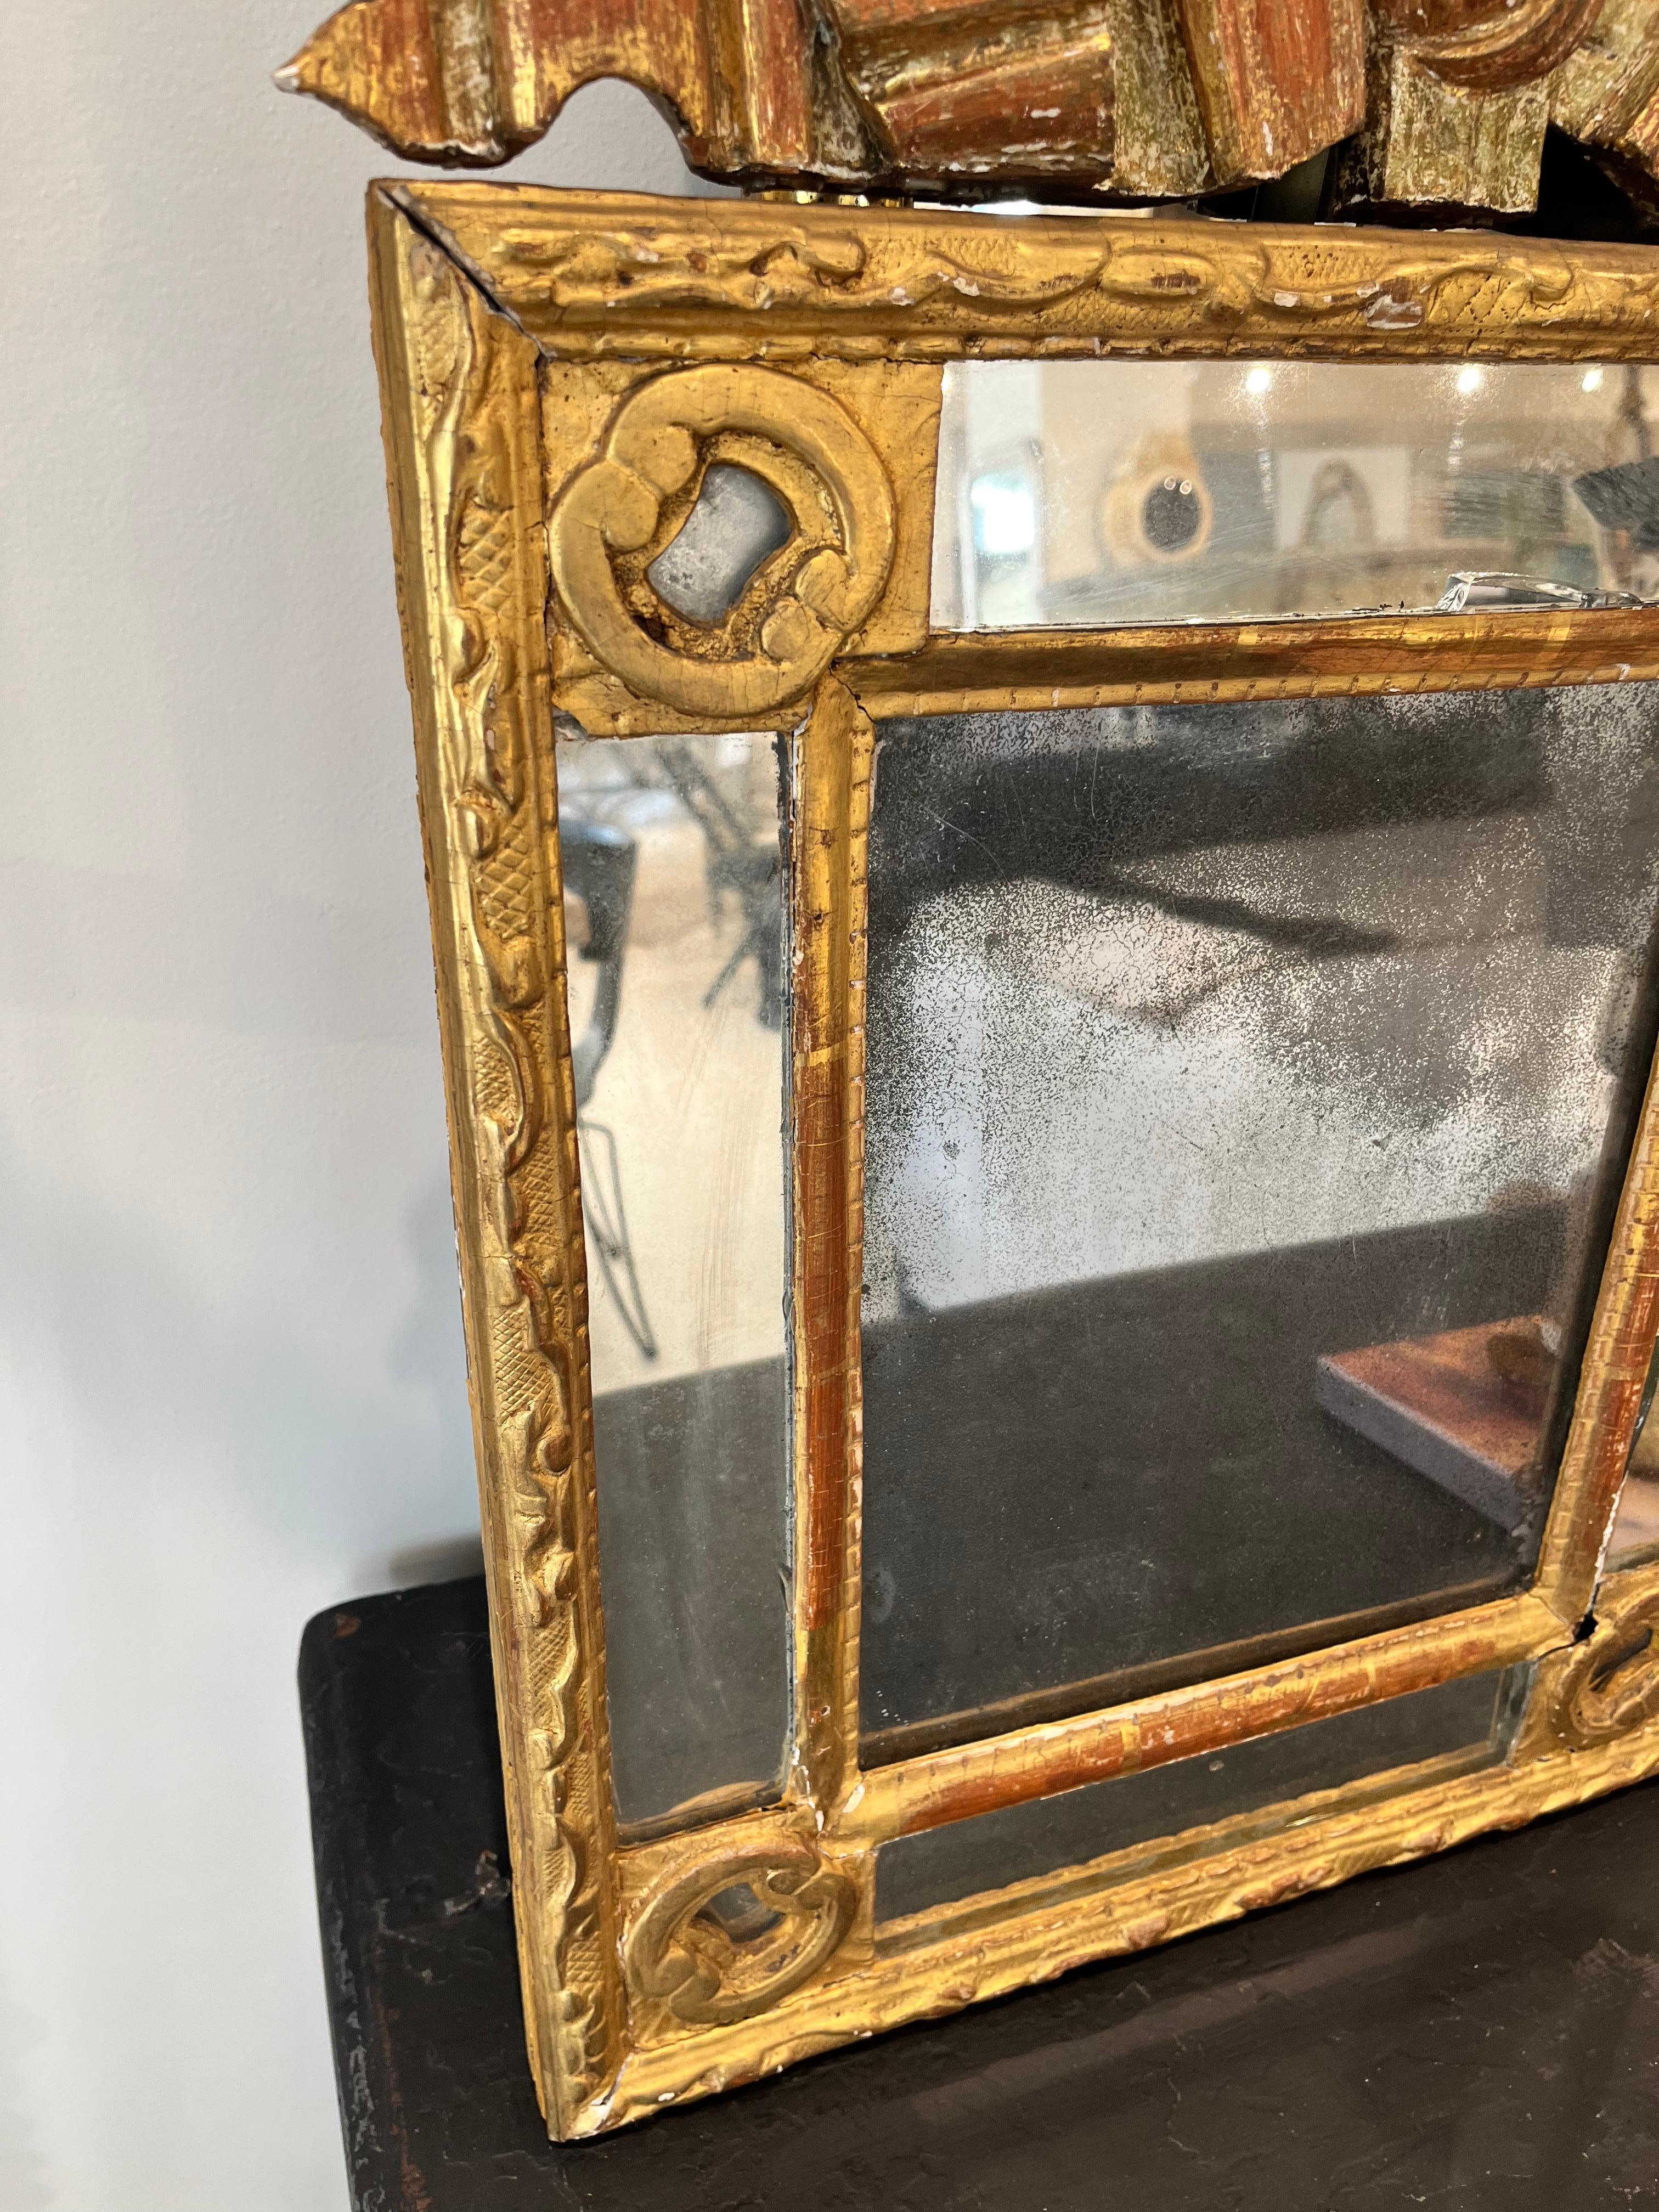 18th century European neoclassical style giltwood mirror with decorative corner motifs, bordered by 4 separate slips. From the estate of Richard I. Johnson of Chestnut Hill, Massachusetts. Gilding is chipped and 3 mirrored slips are cracked.